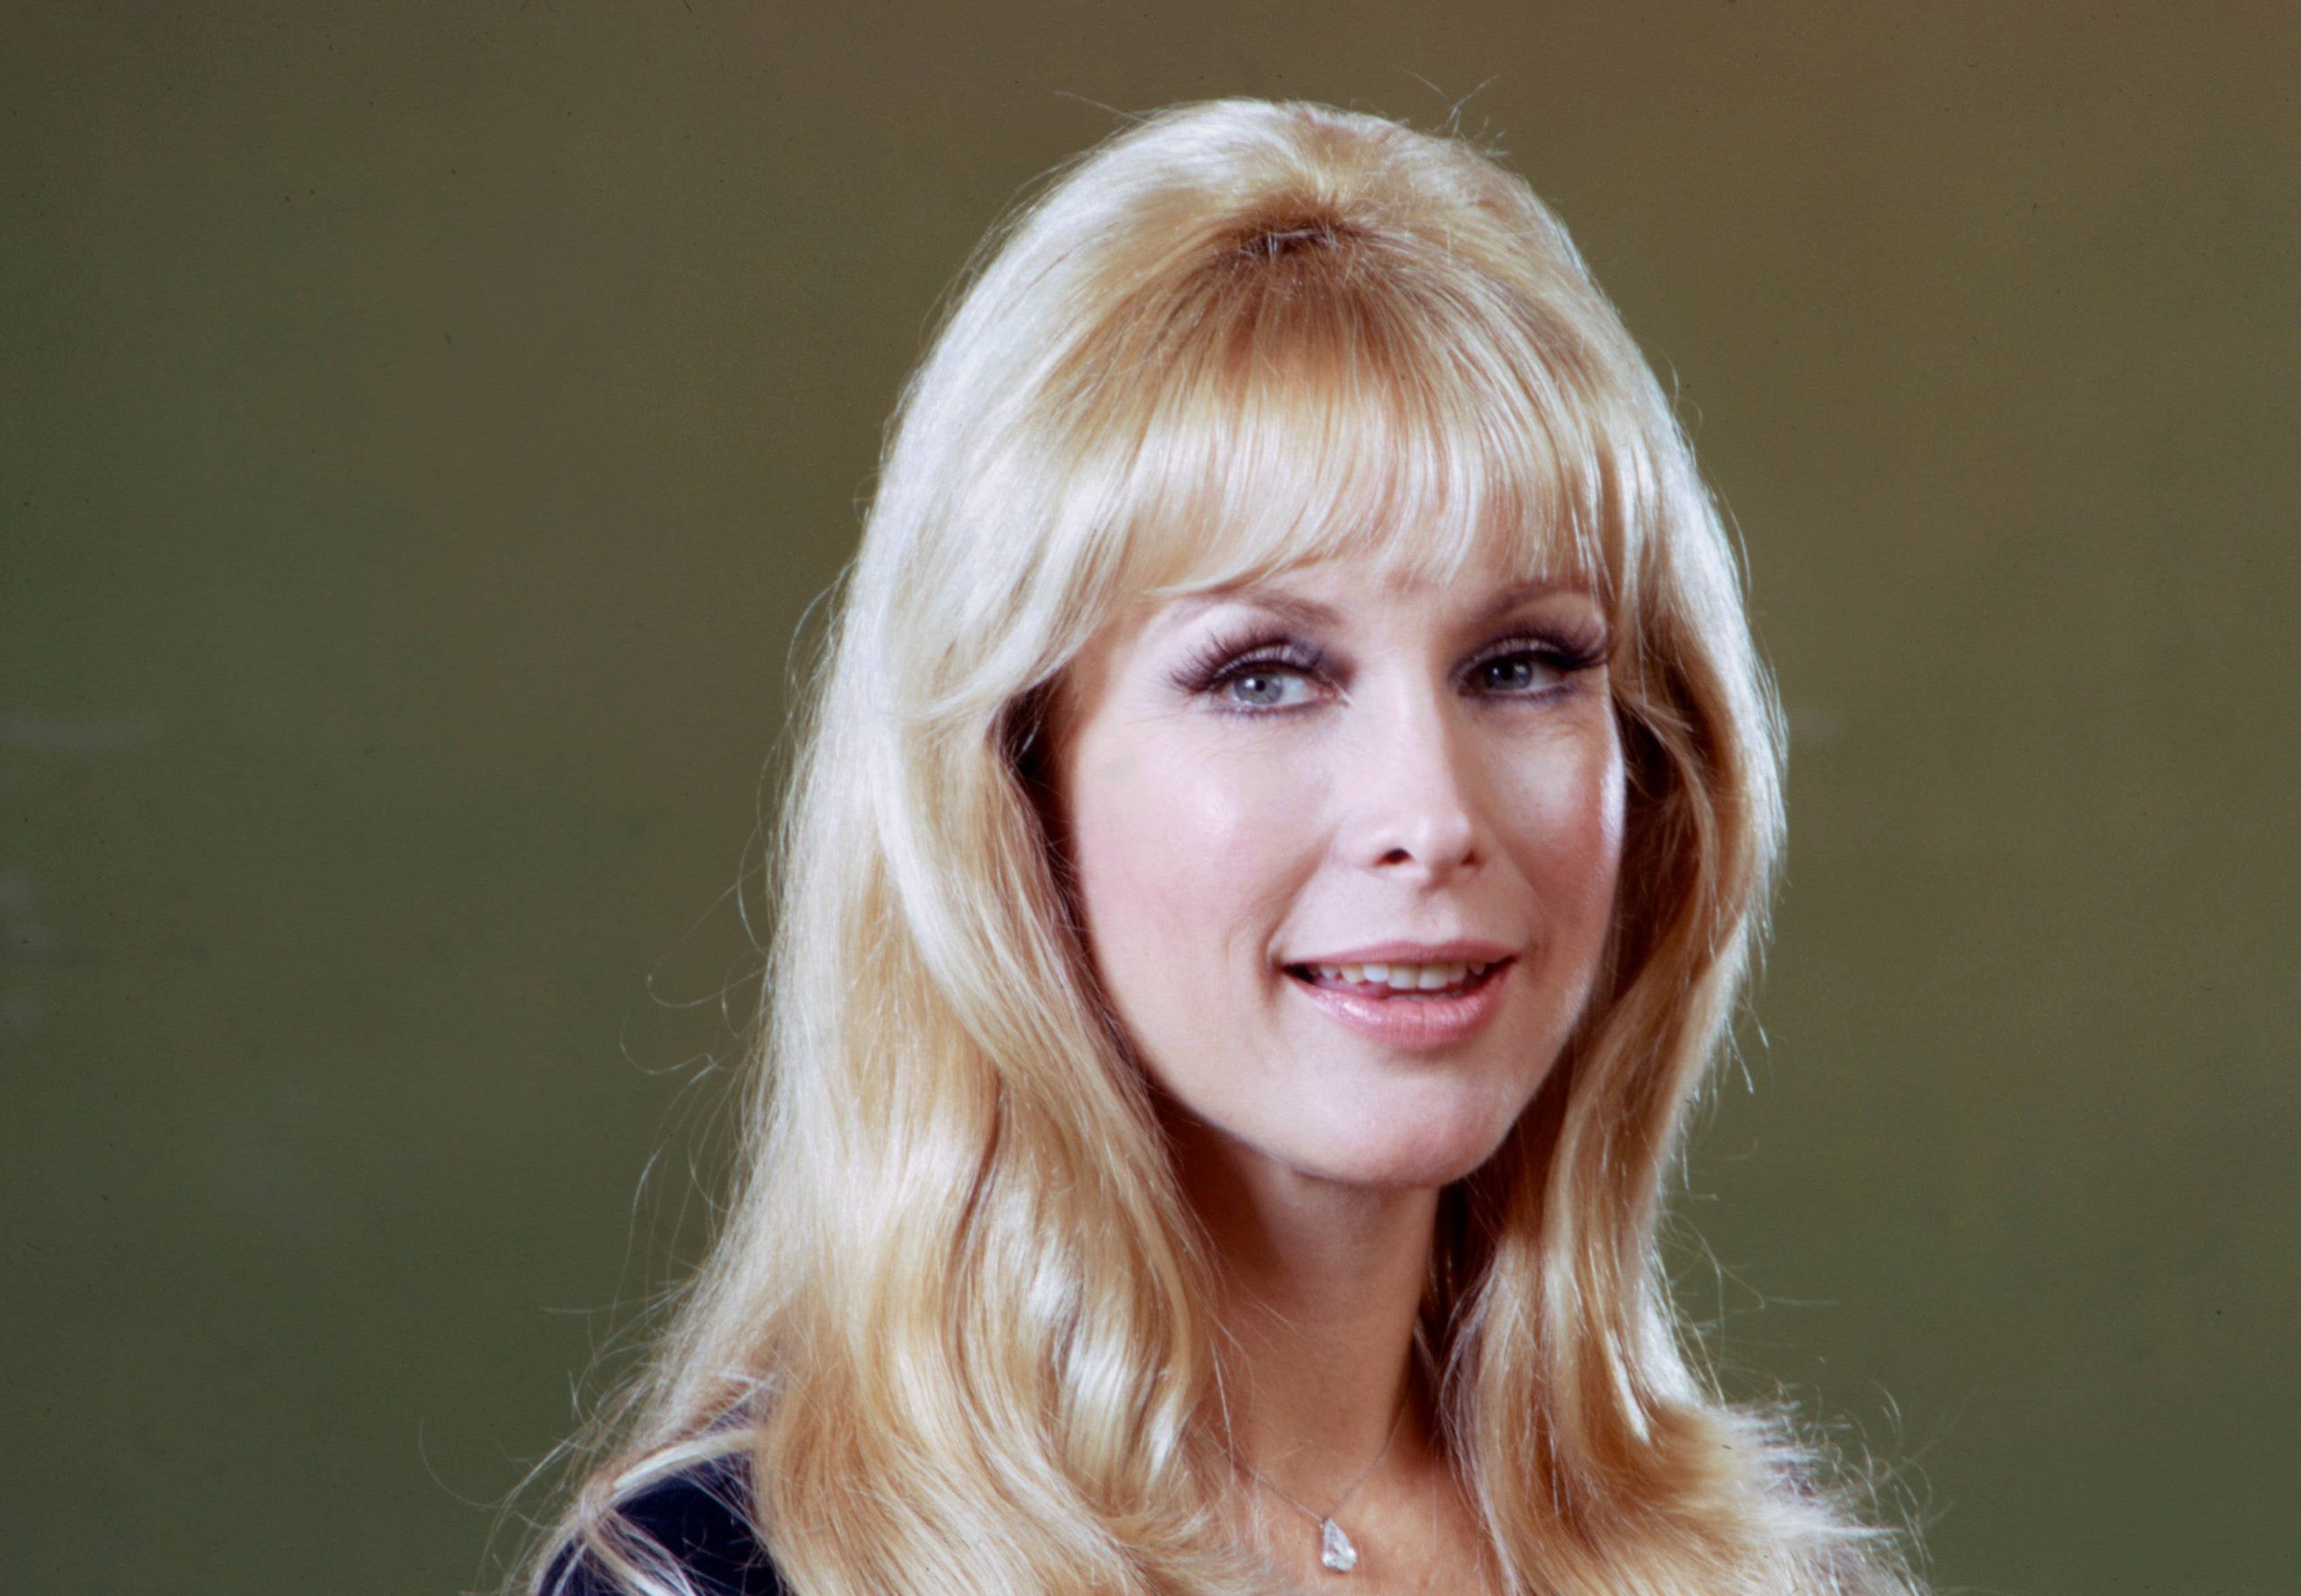 Barbara Eden Wiki, Bio, Age, Net Worth, and Other Facts